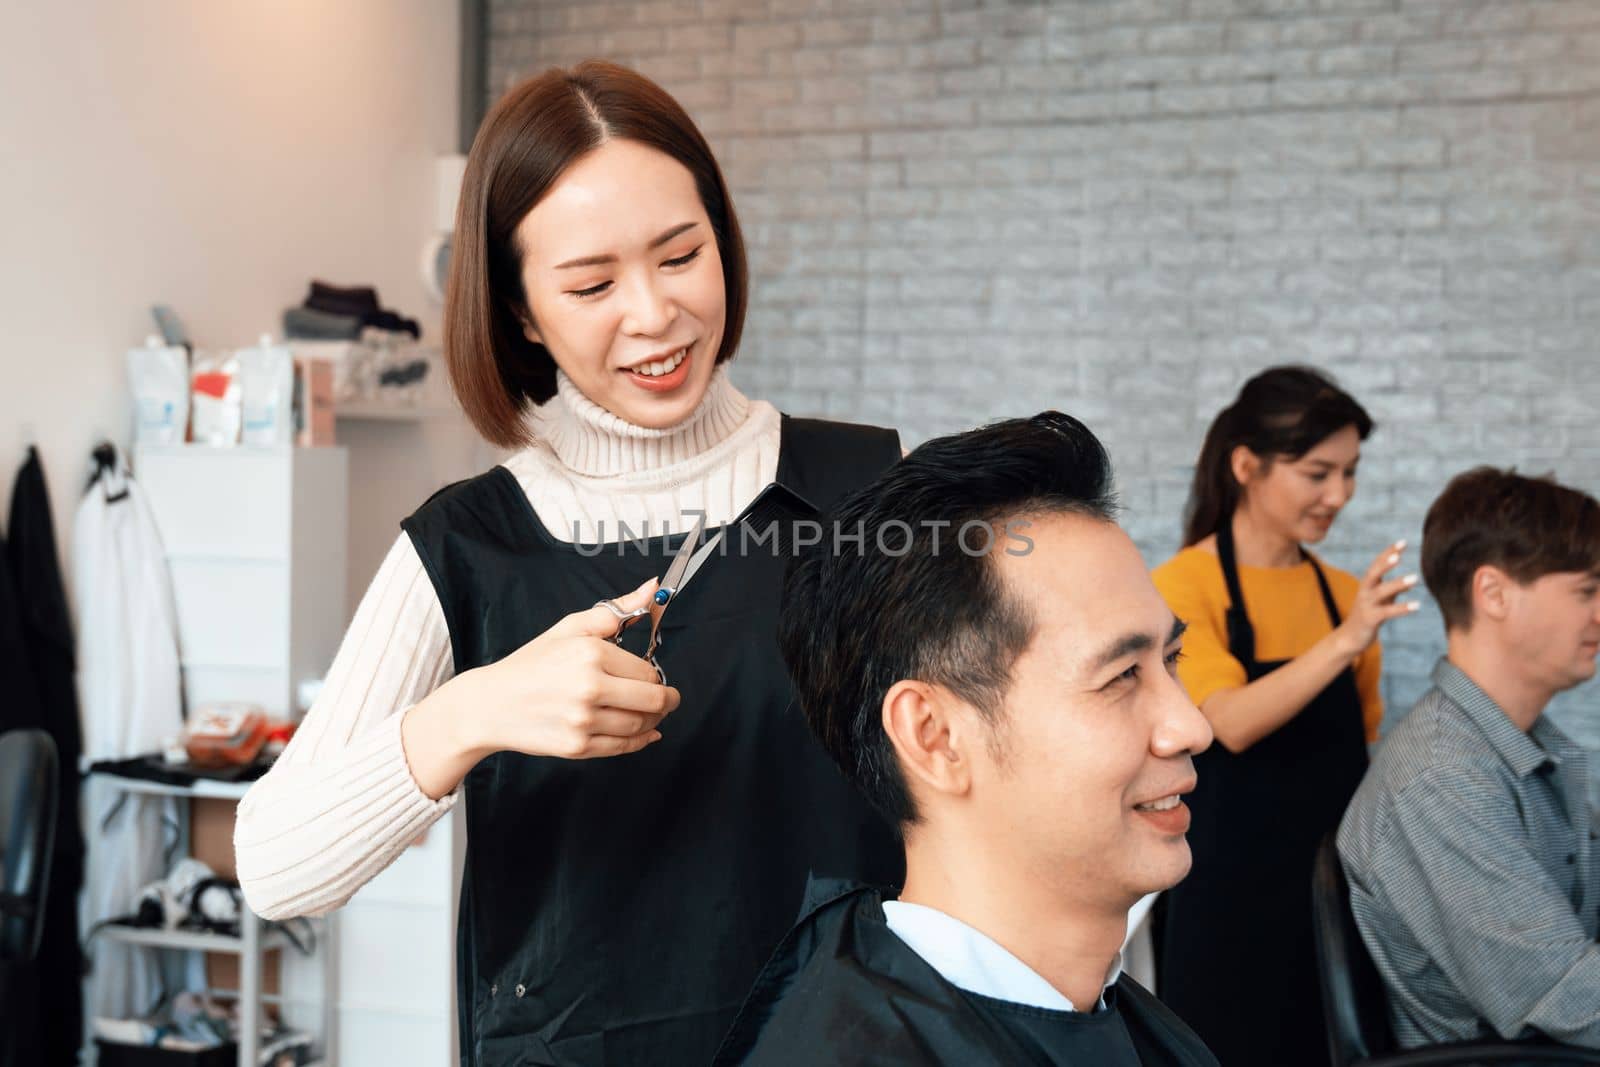 Asian female hairdresser making haircut for two male customer with male hairstyle in qualified barbershop. Men's hairstyling by a scissor and comb in hair salon concept.